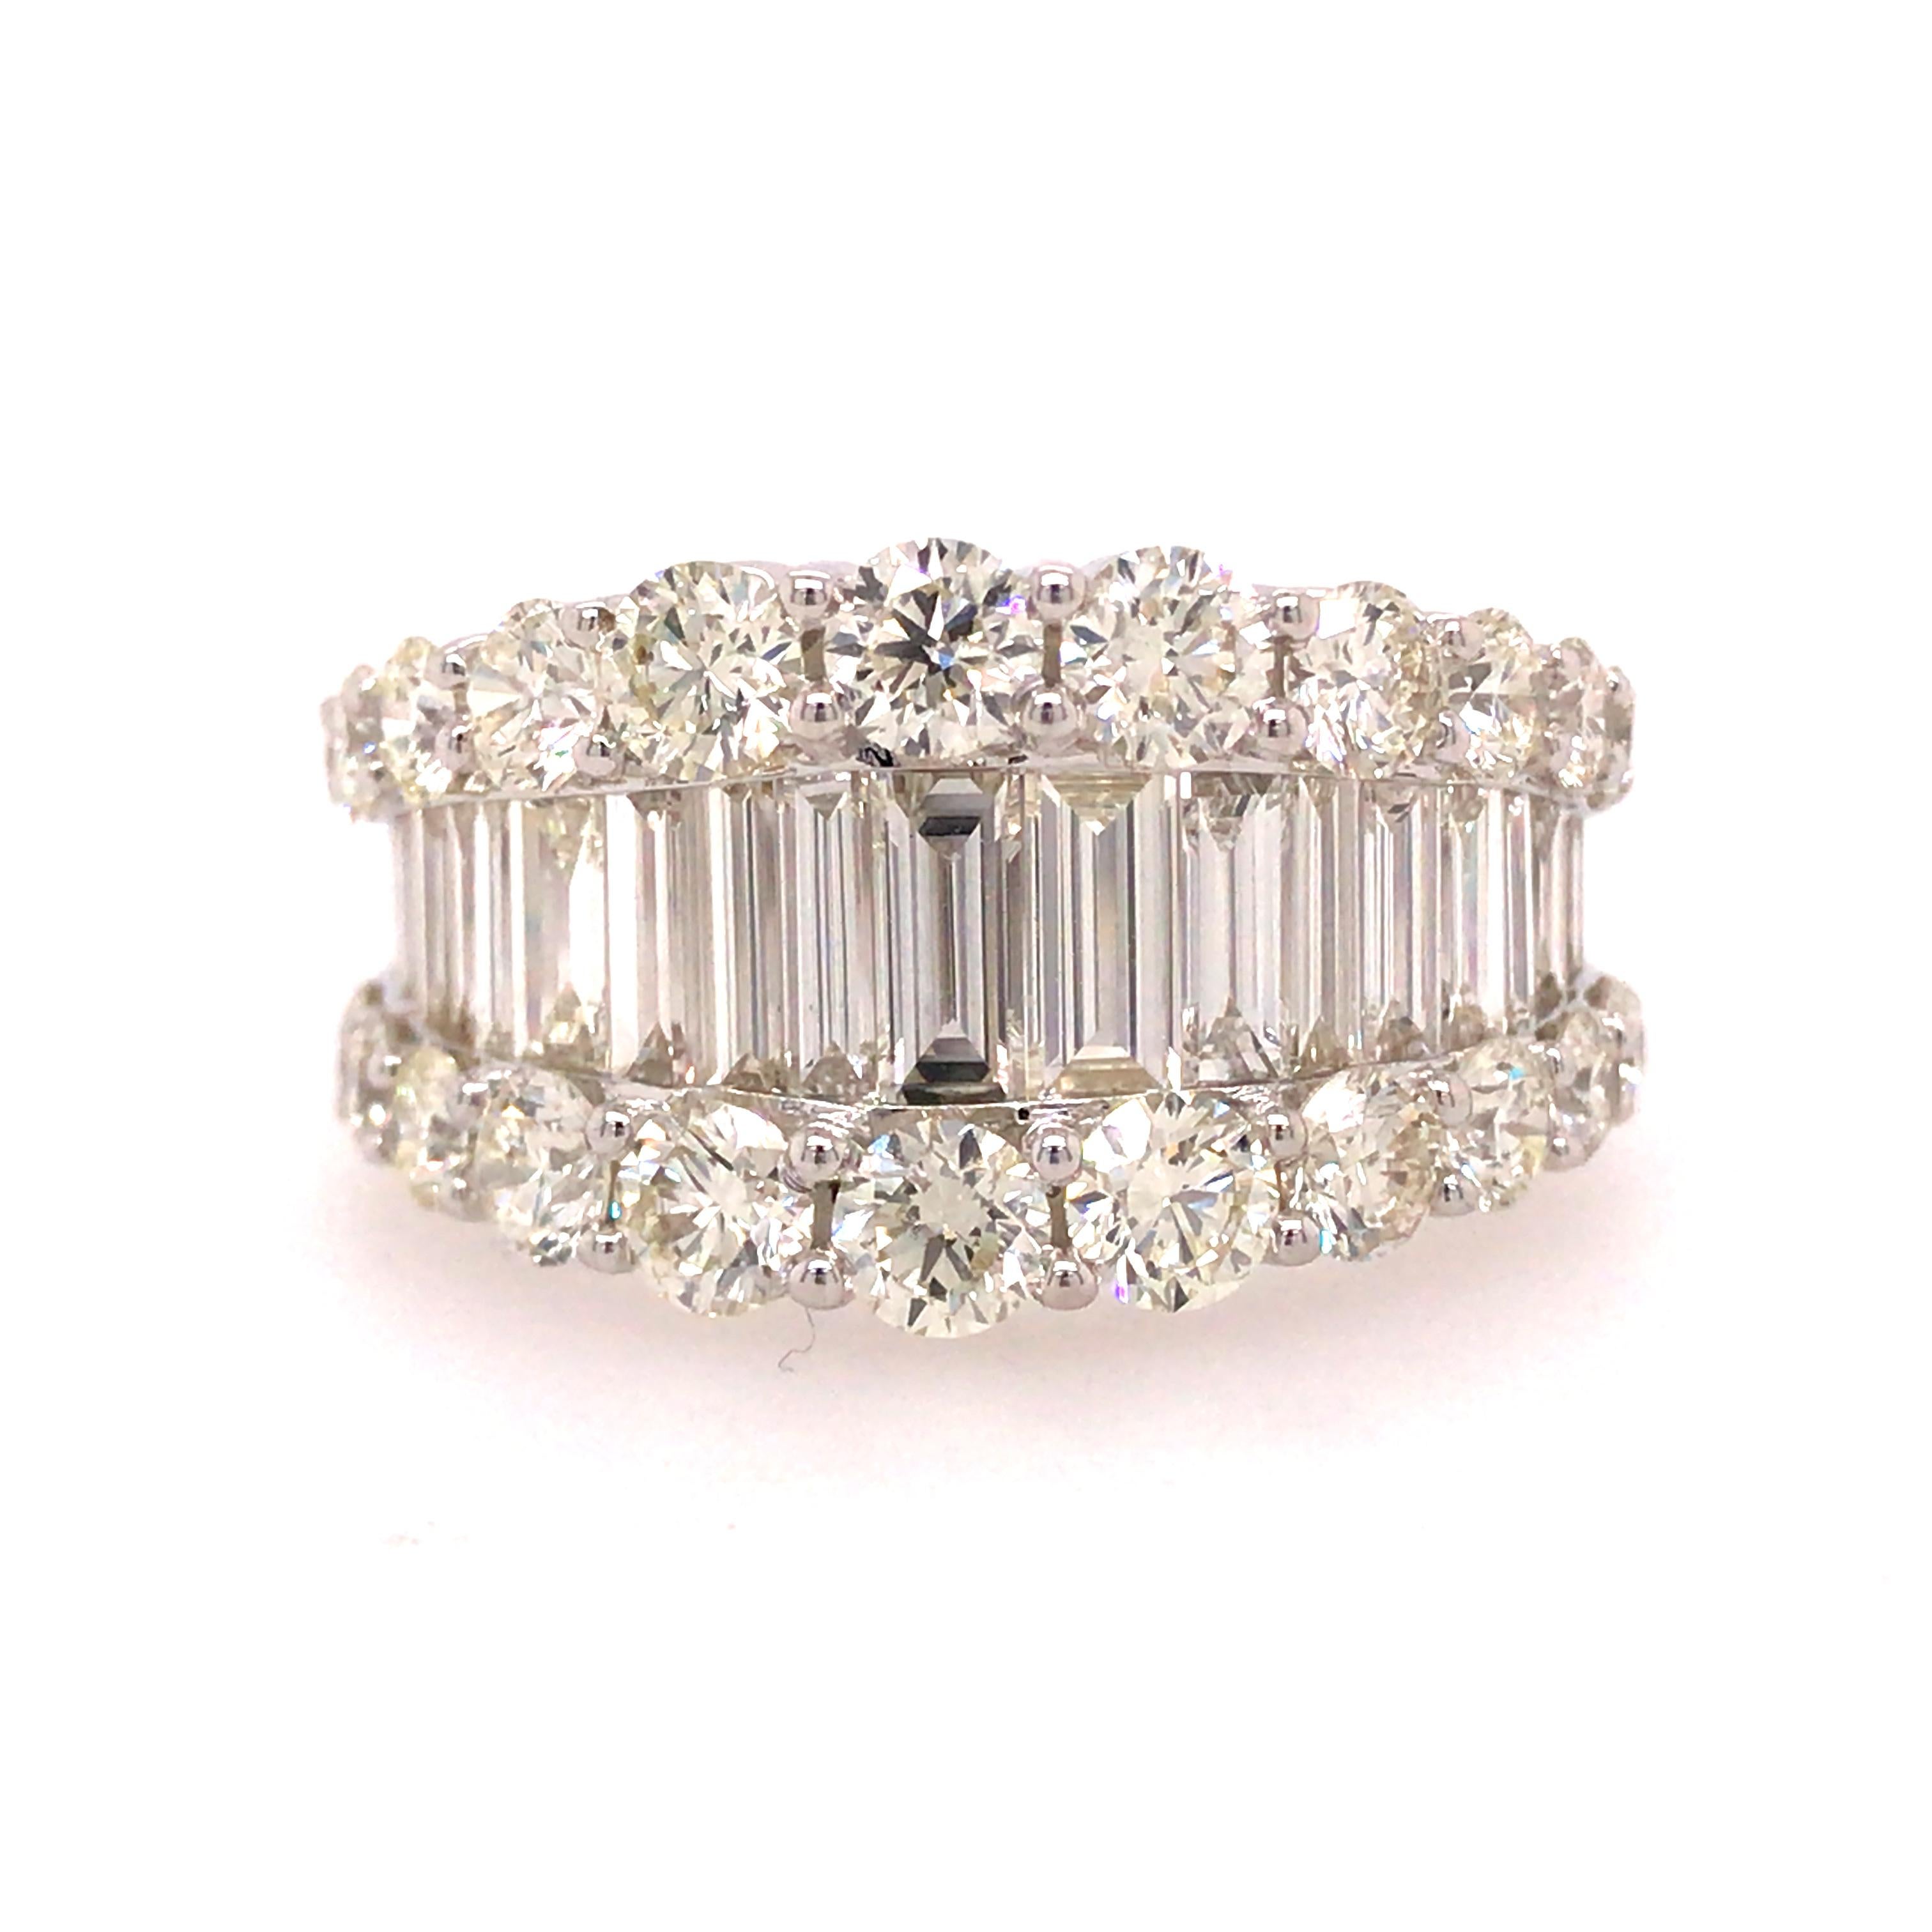 Wide Round and Baguette Diamond Band in 14K White Gold.  Round Brilliant Cut and Baguette diamonds weighing 4.88 carat total weight, G-I in color and VS in clarity are expertly set.  The Band measures 1/2 inch in width at the widest point.  Ring